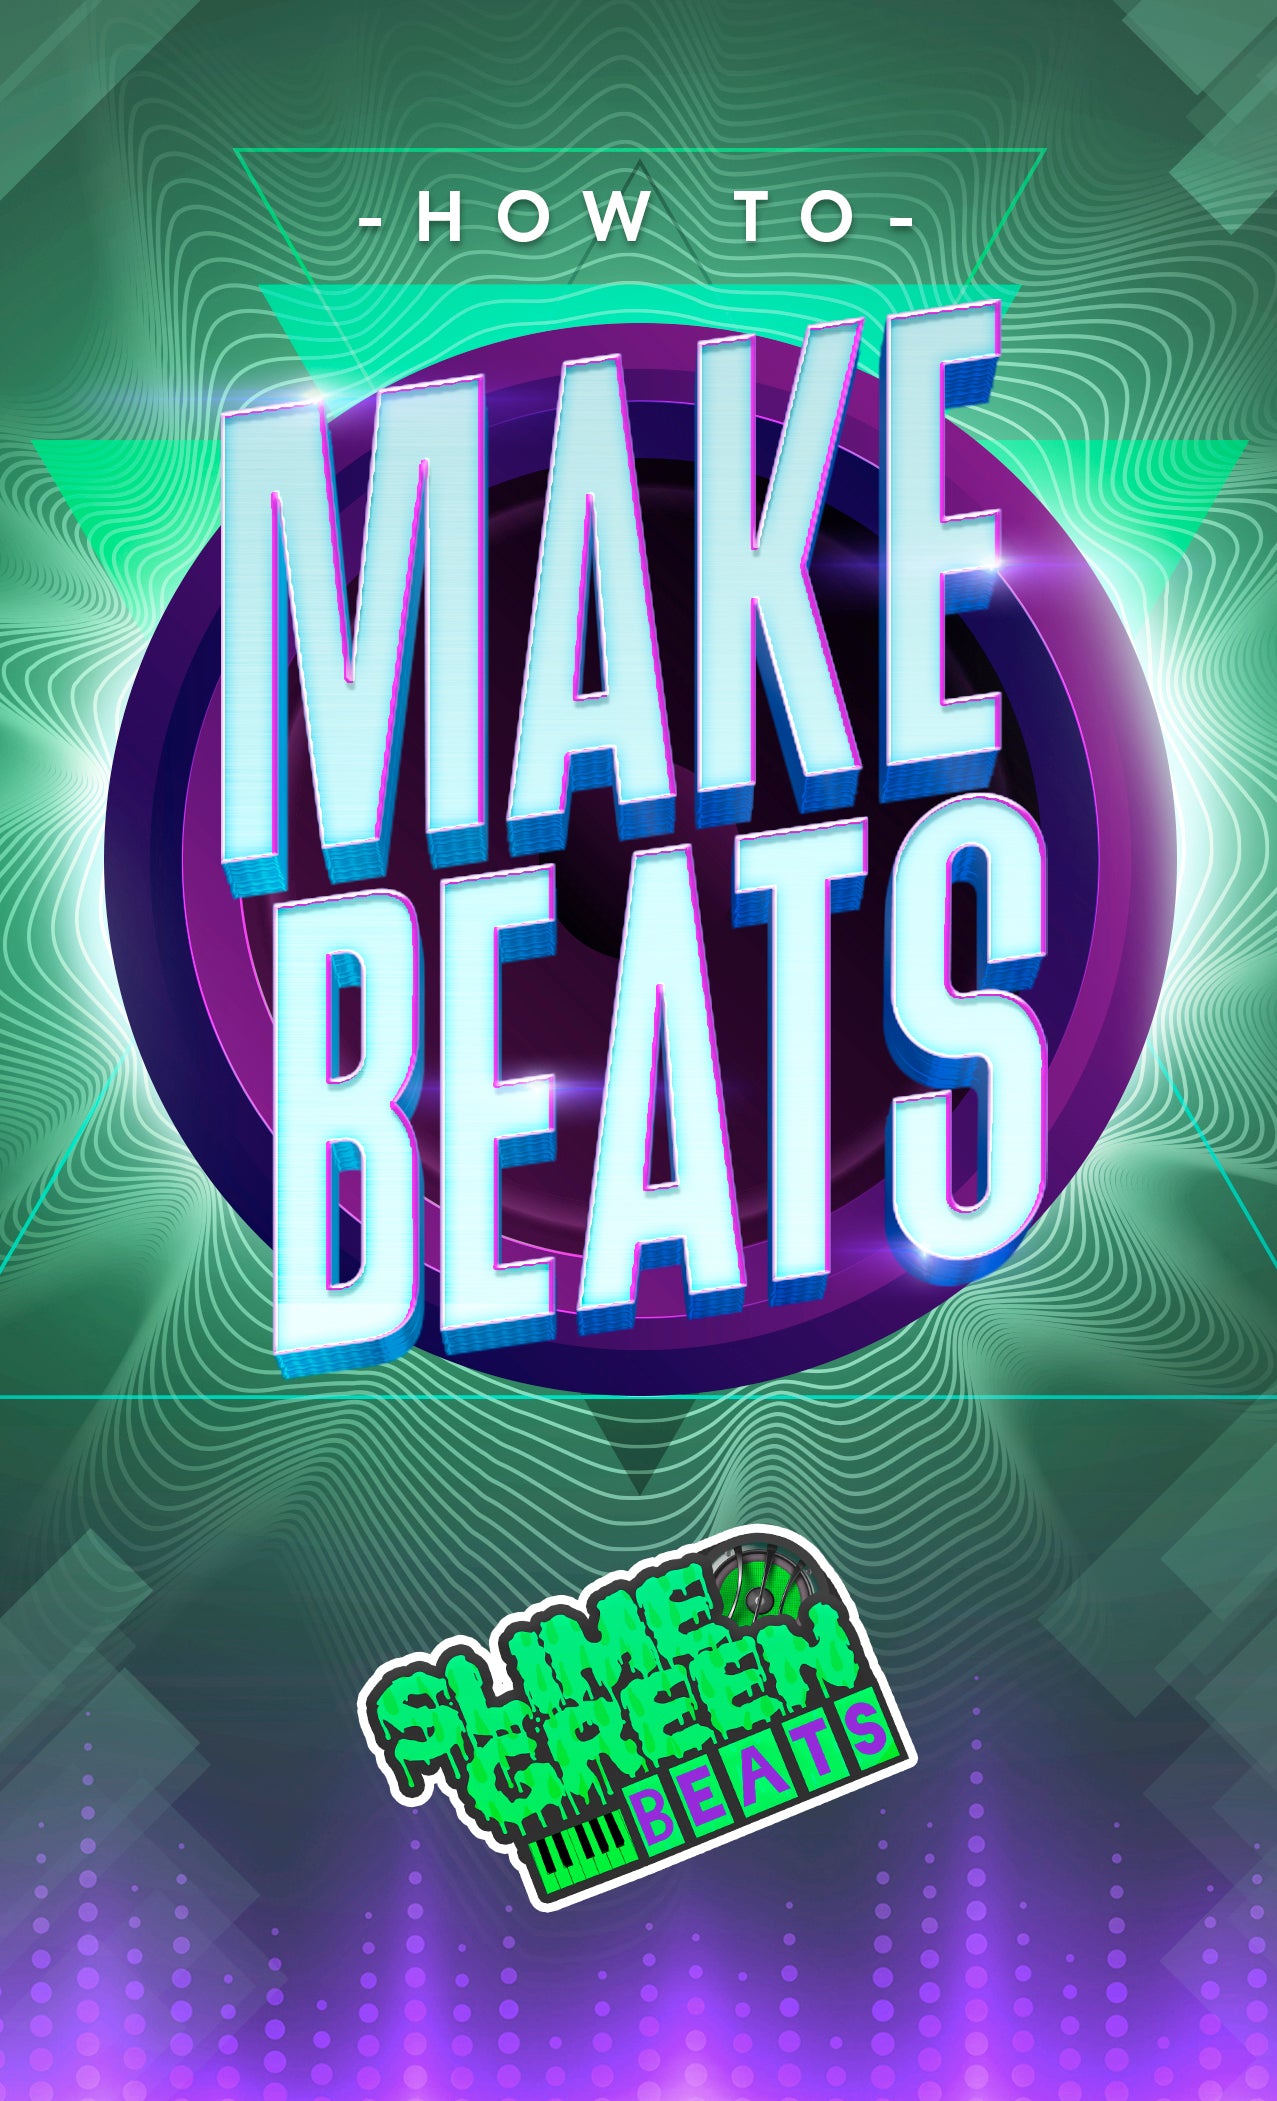 How to make beats by Slime Green Beats cover art